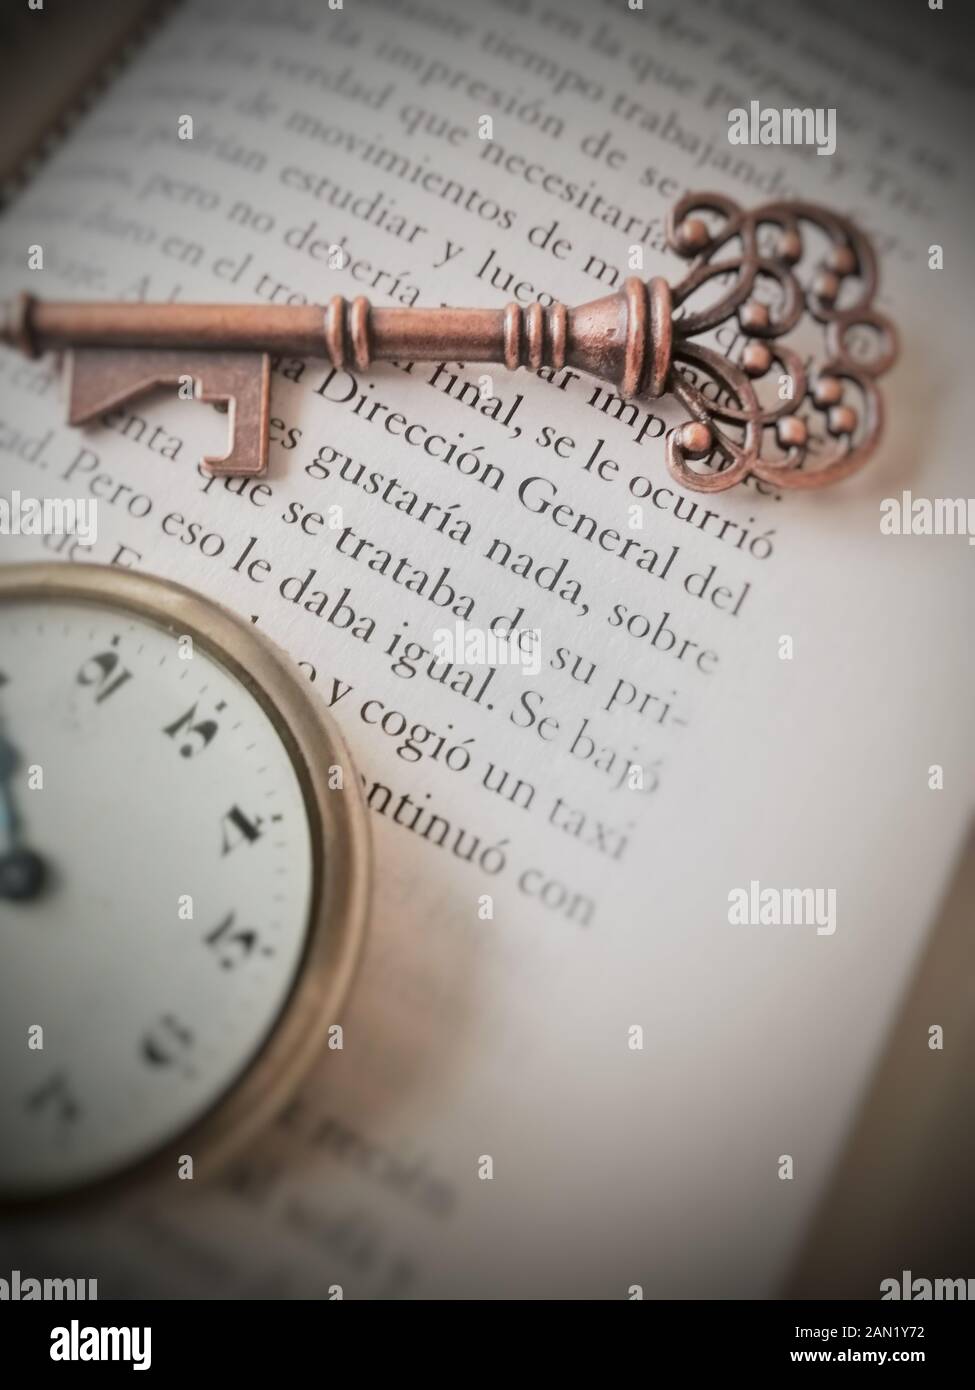 old key detail on book page and pocket watch Stock Photo